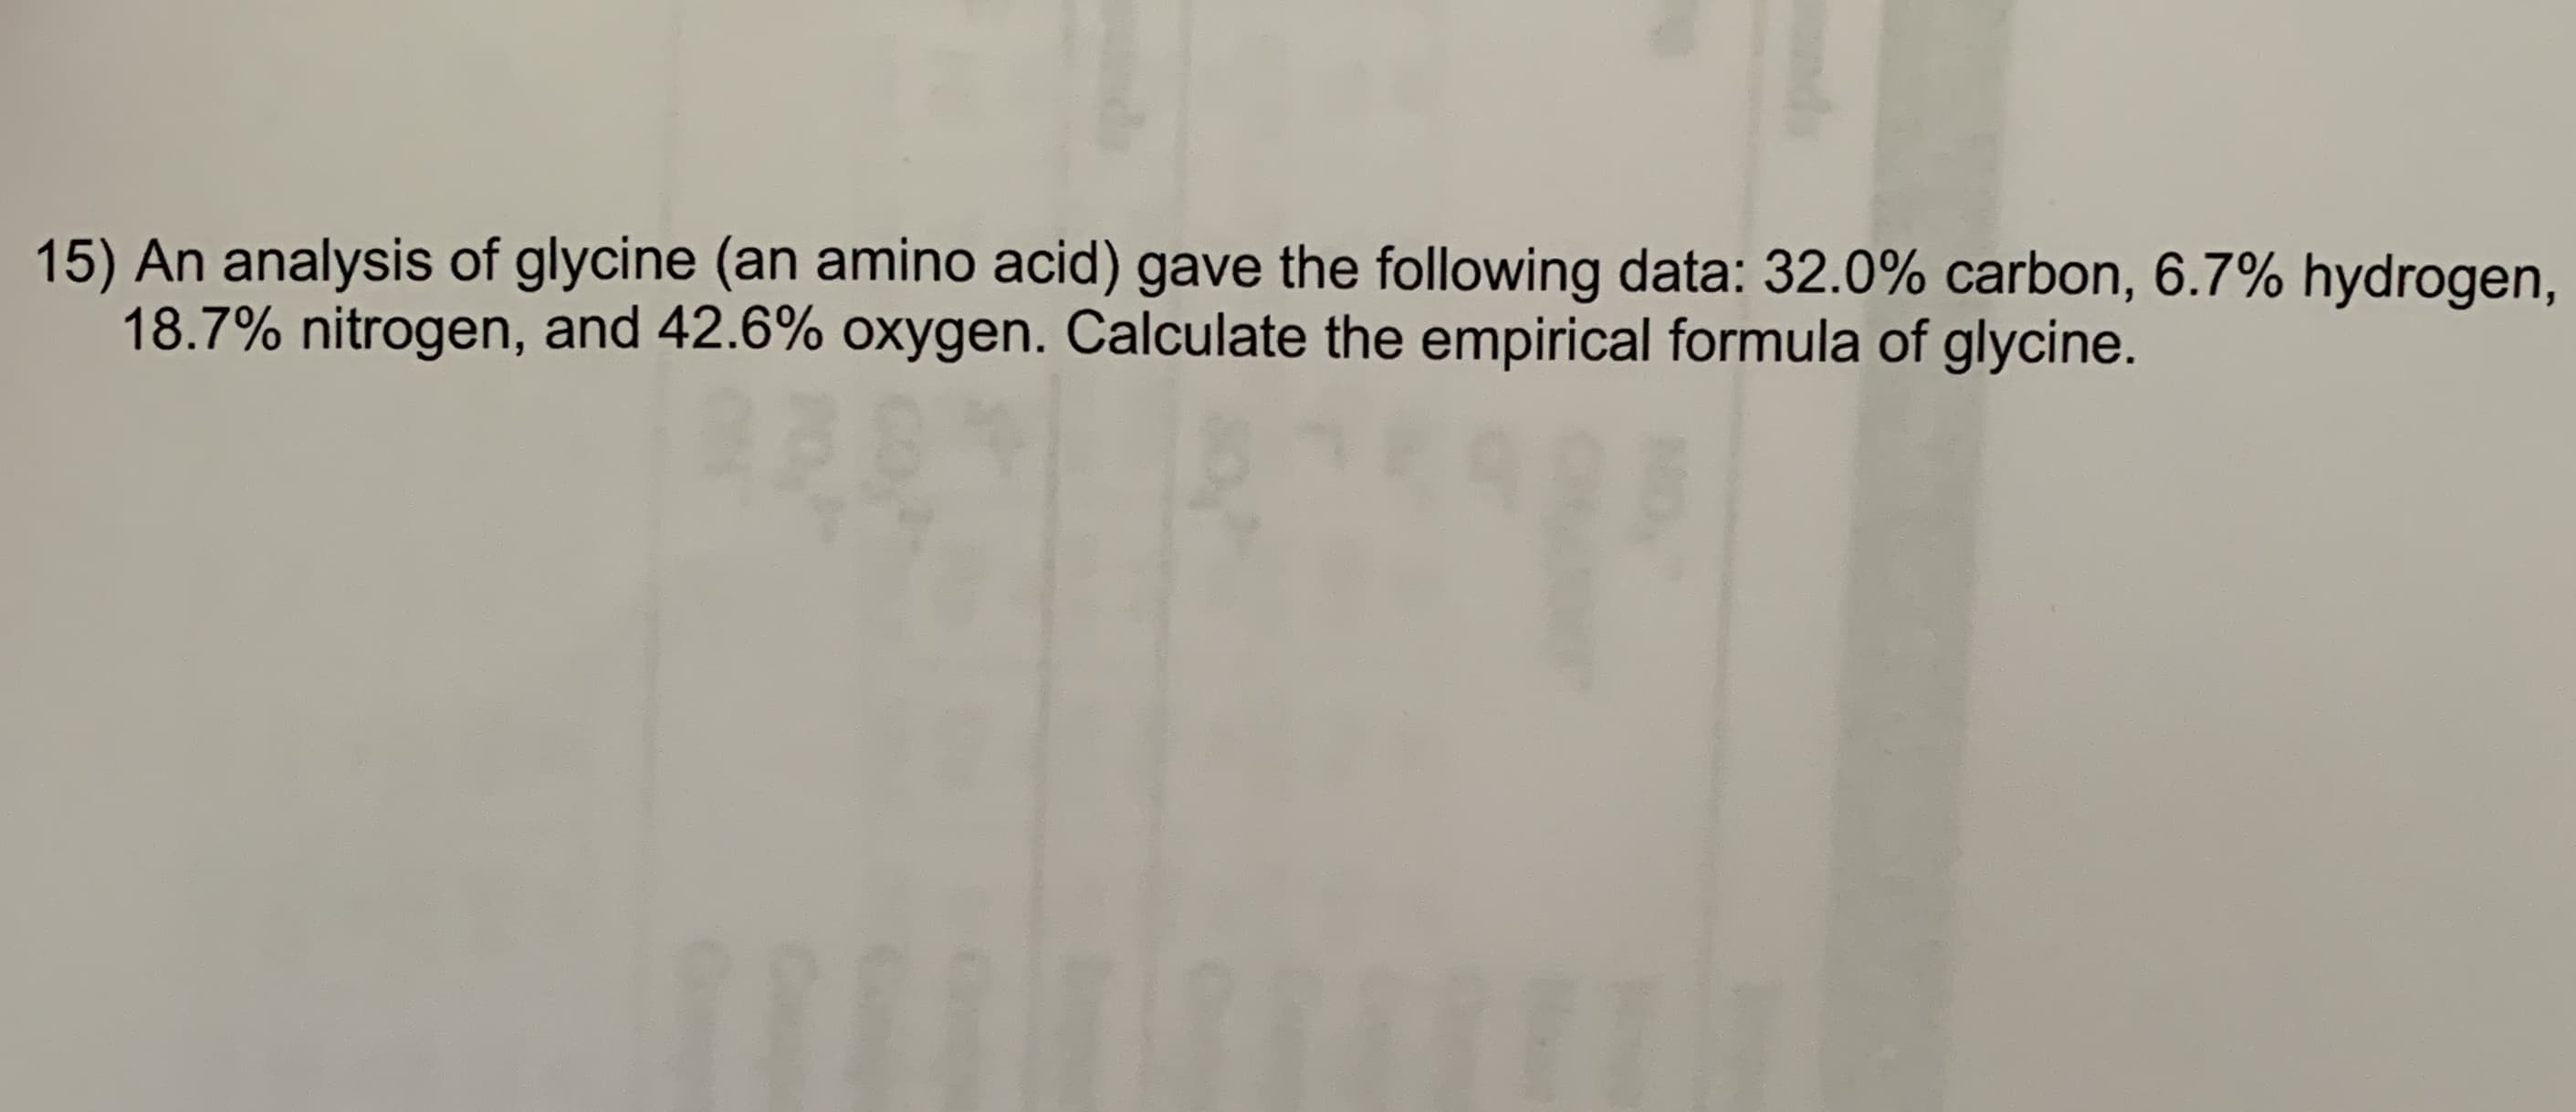 15) An analysis of glycine (an amino acid) gave the following data: 32.0% carbon, 6.7% hydrogen,
18.7% nitrogen, and 42.6% oxygen. Calculate the empirical formula of glycine.
